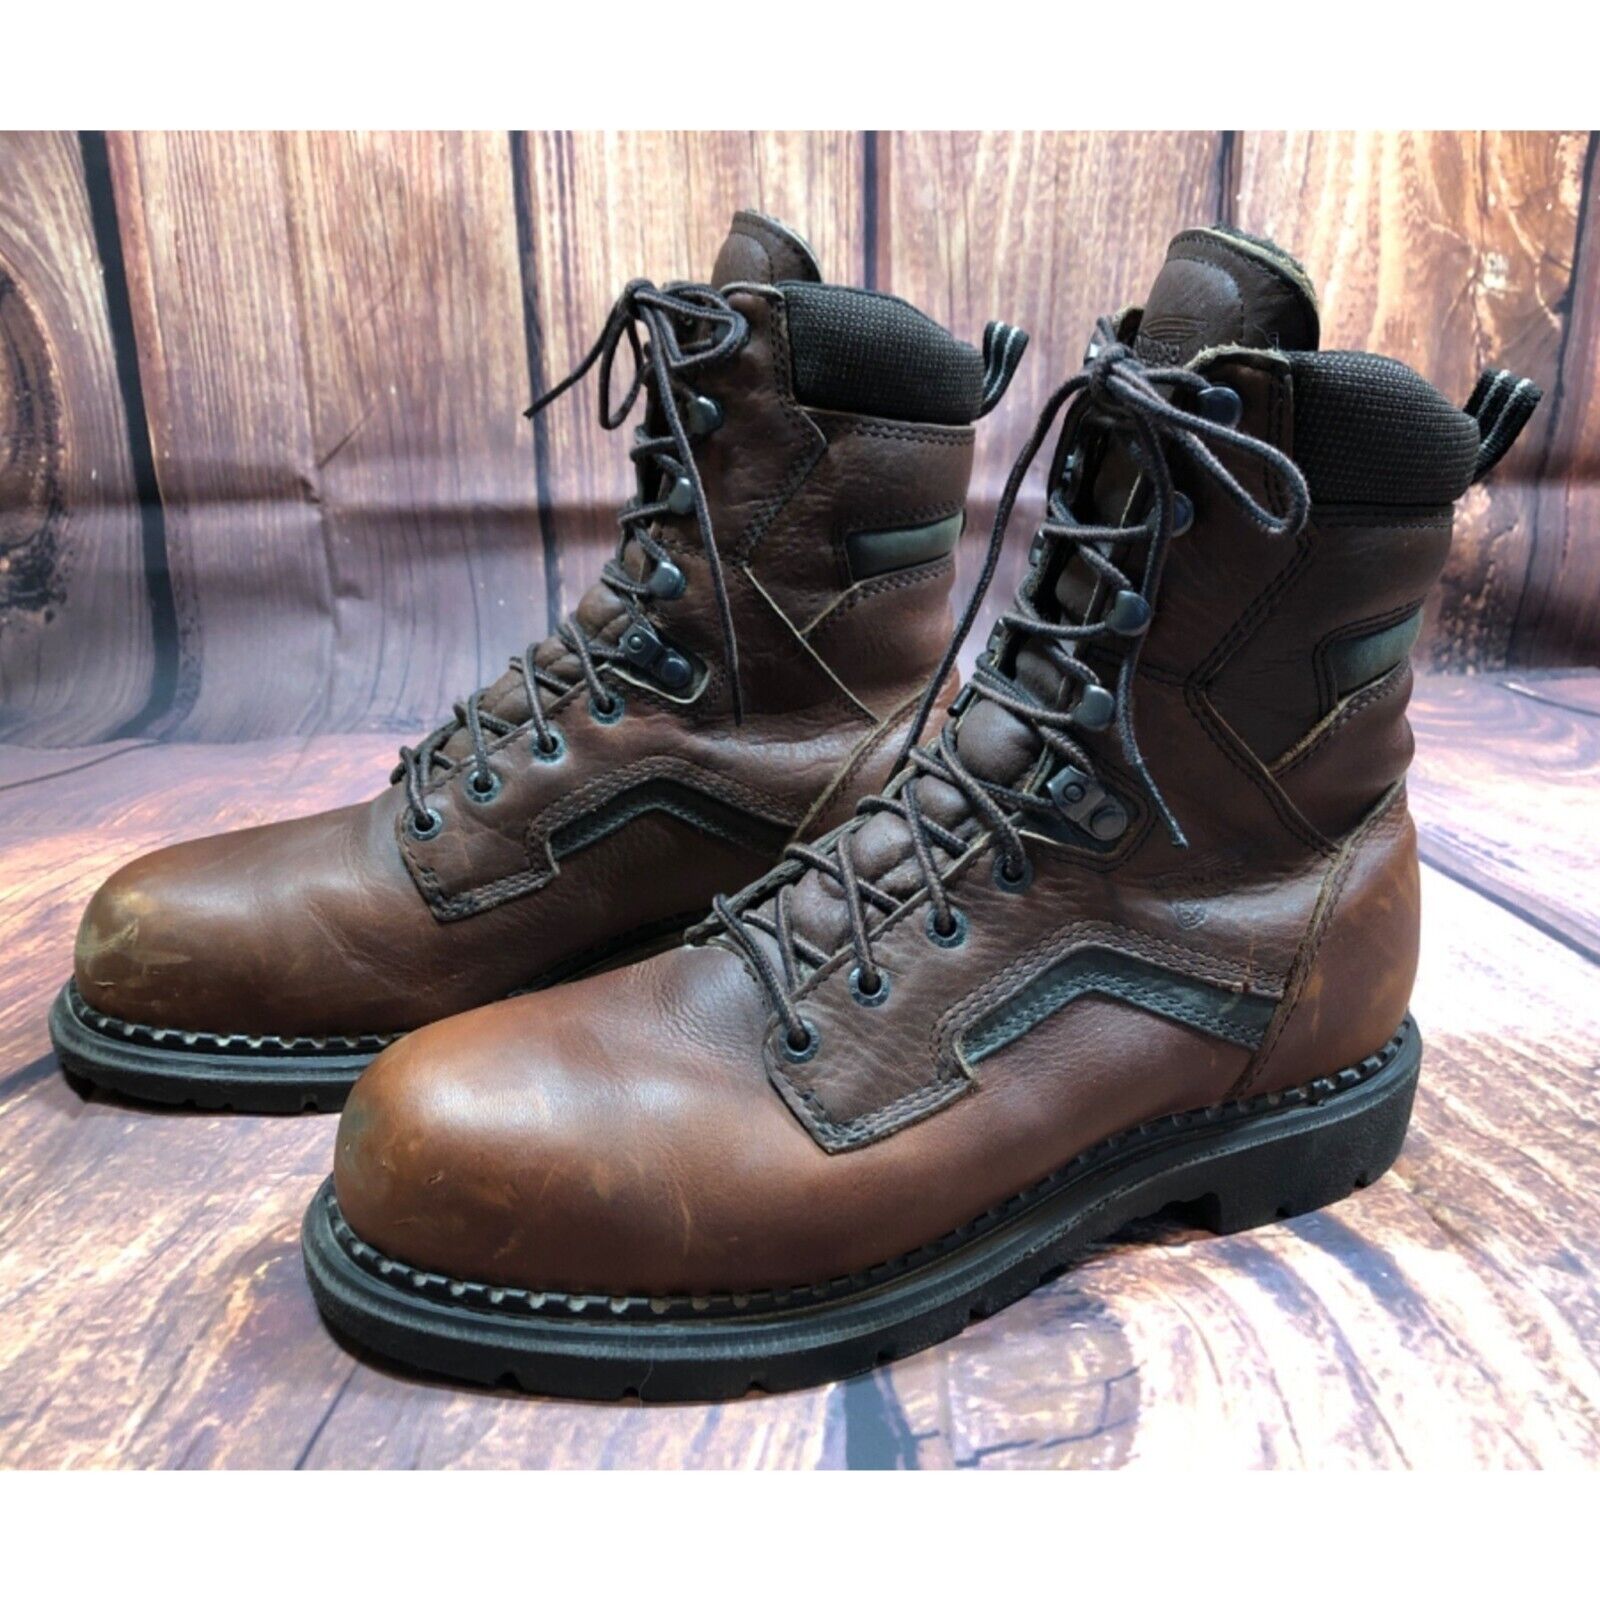 Vintage Red Wing 2238 Dyna Force Tall Steel Toe Brown Work Boots Mens 10 D (i8e)